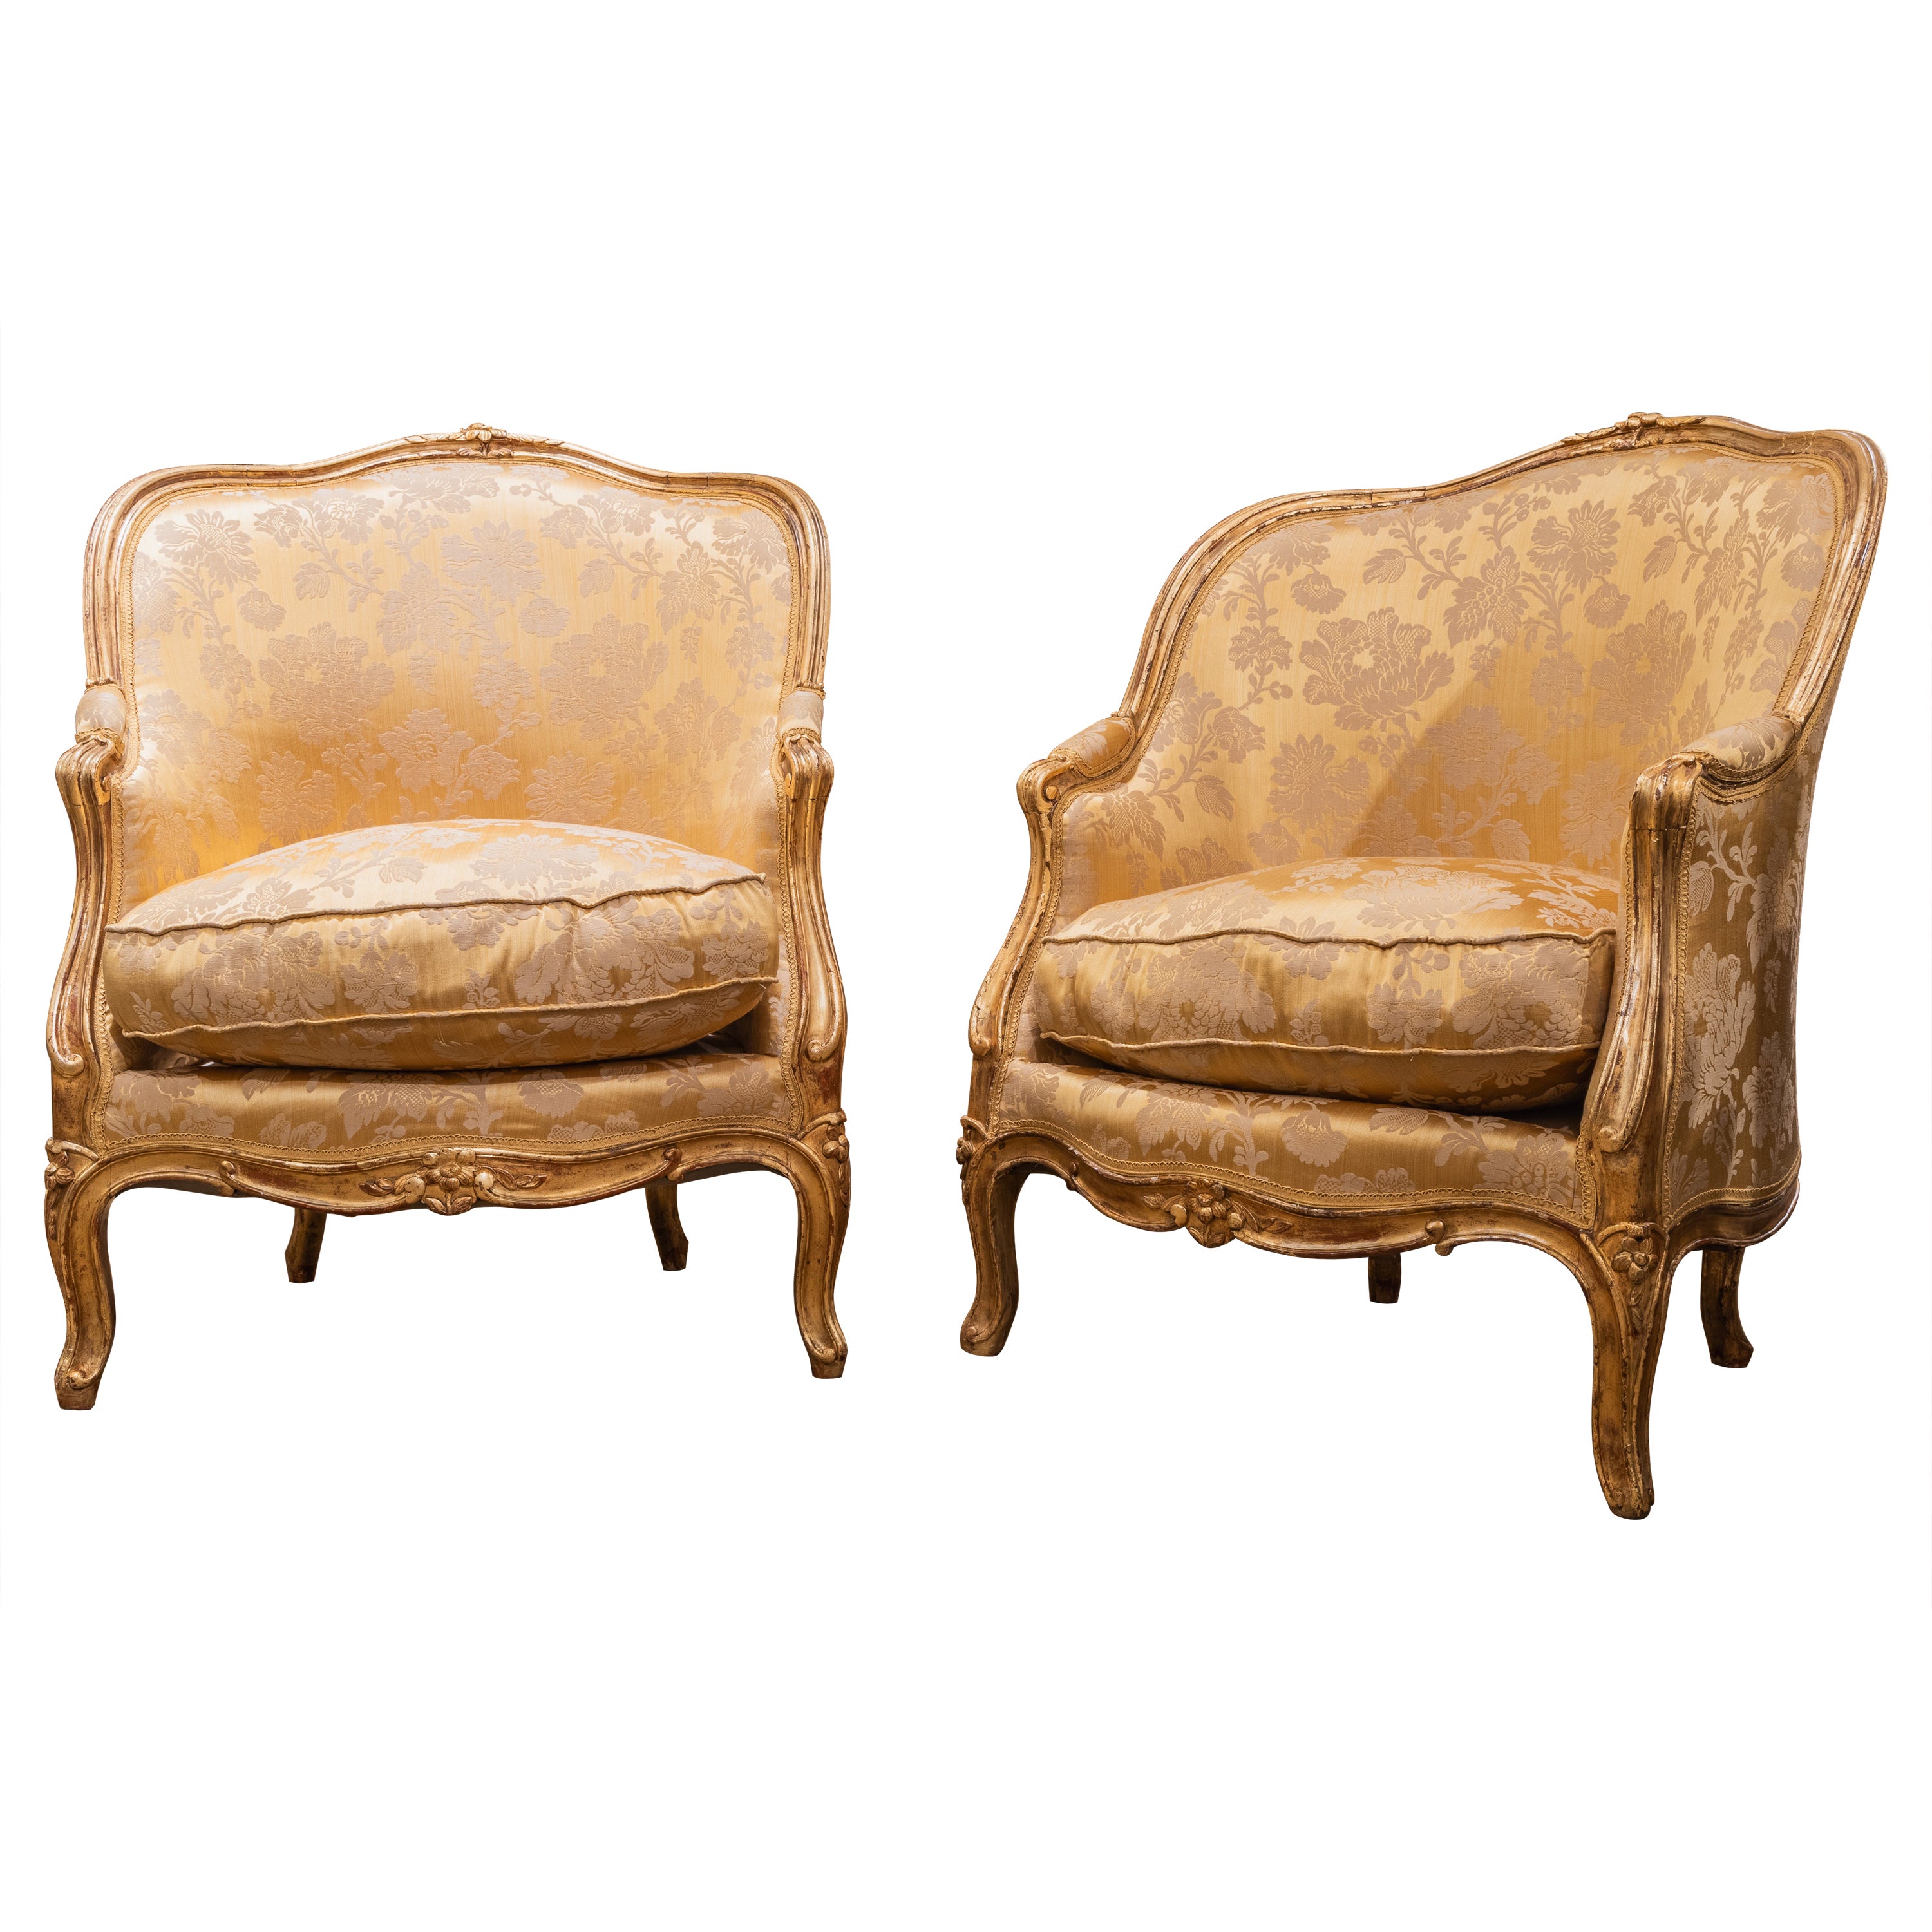 A fine pair of 19th century Louis XV water gilt and carved bergeres For Sale